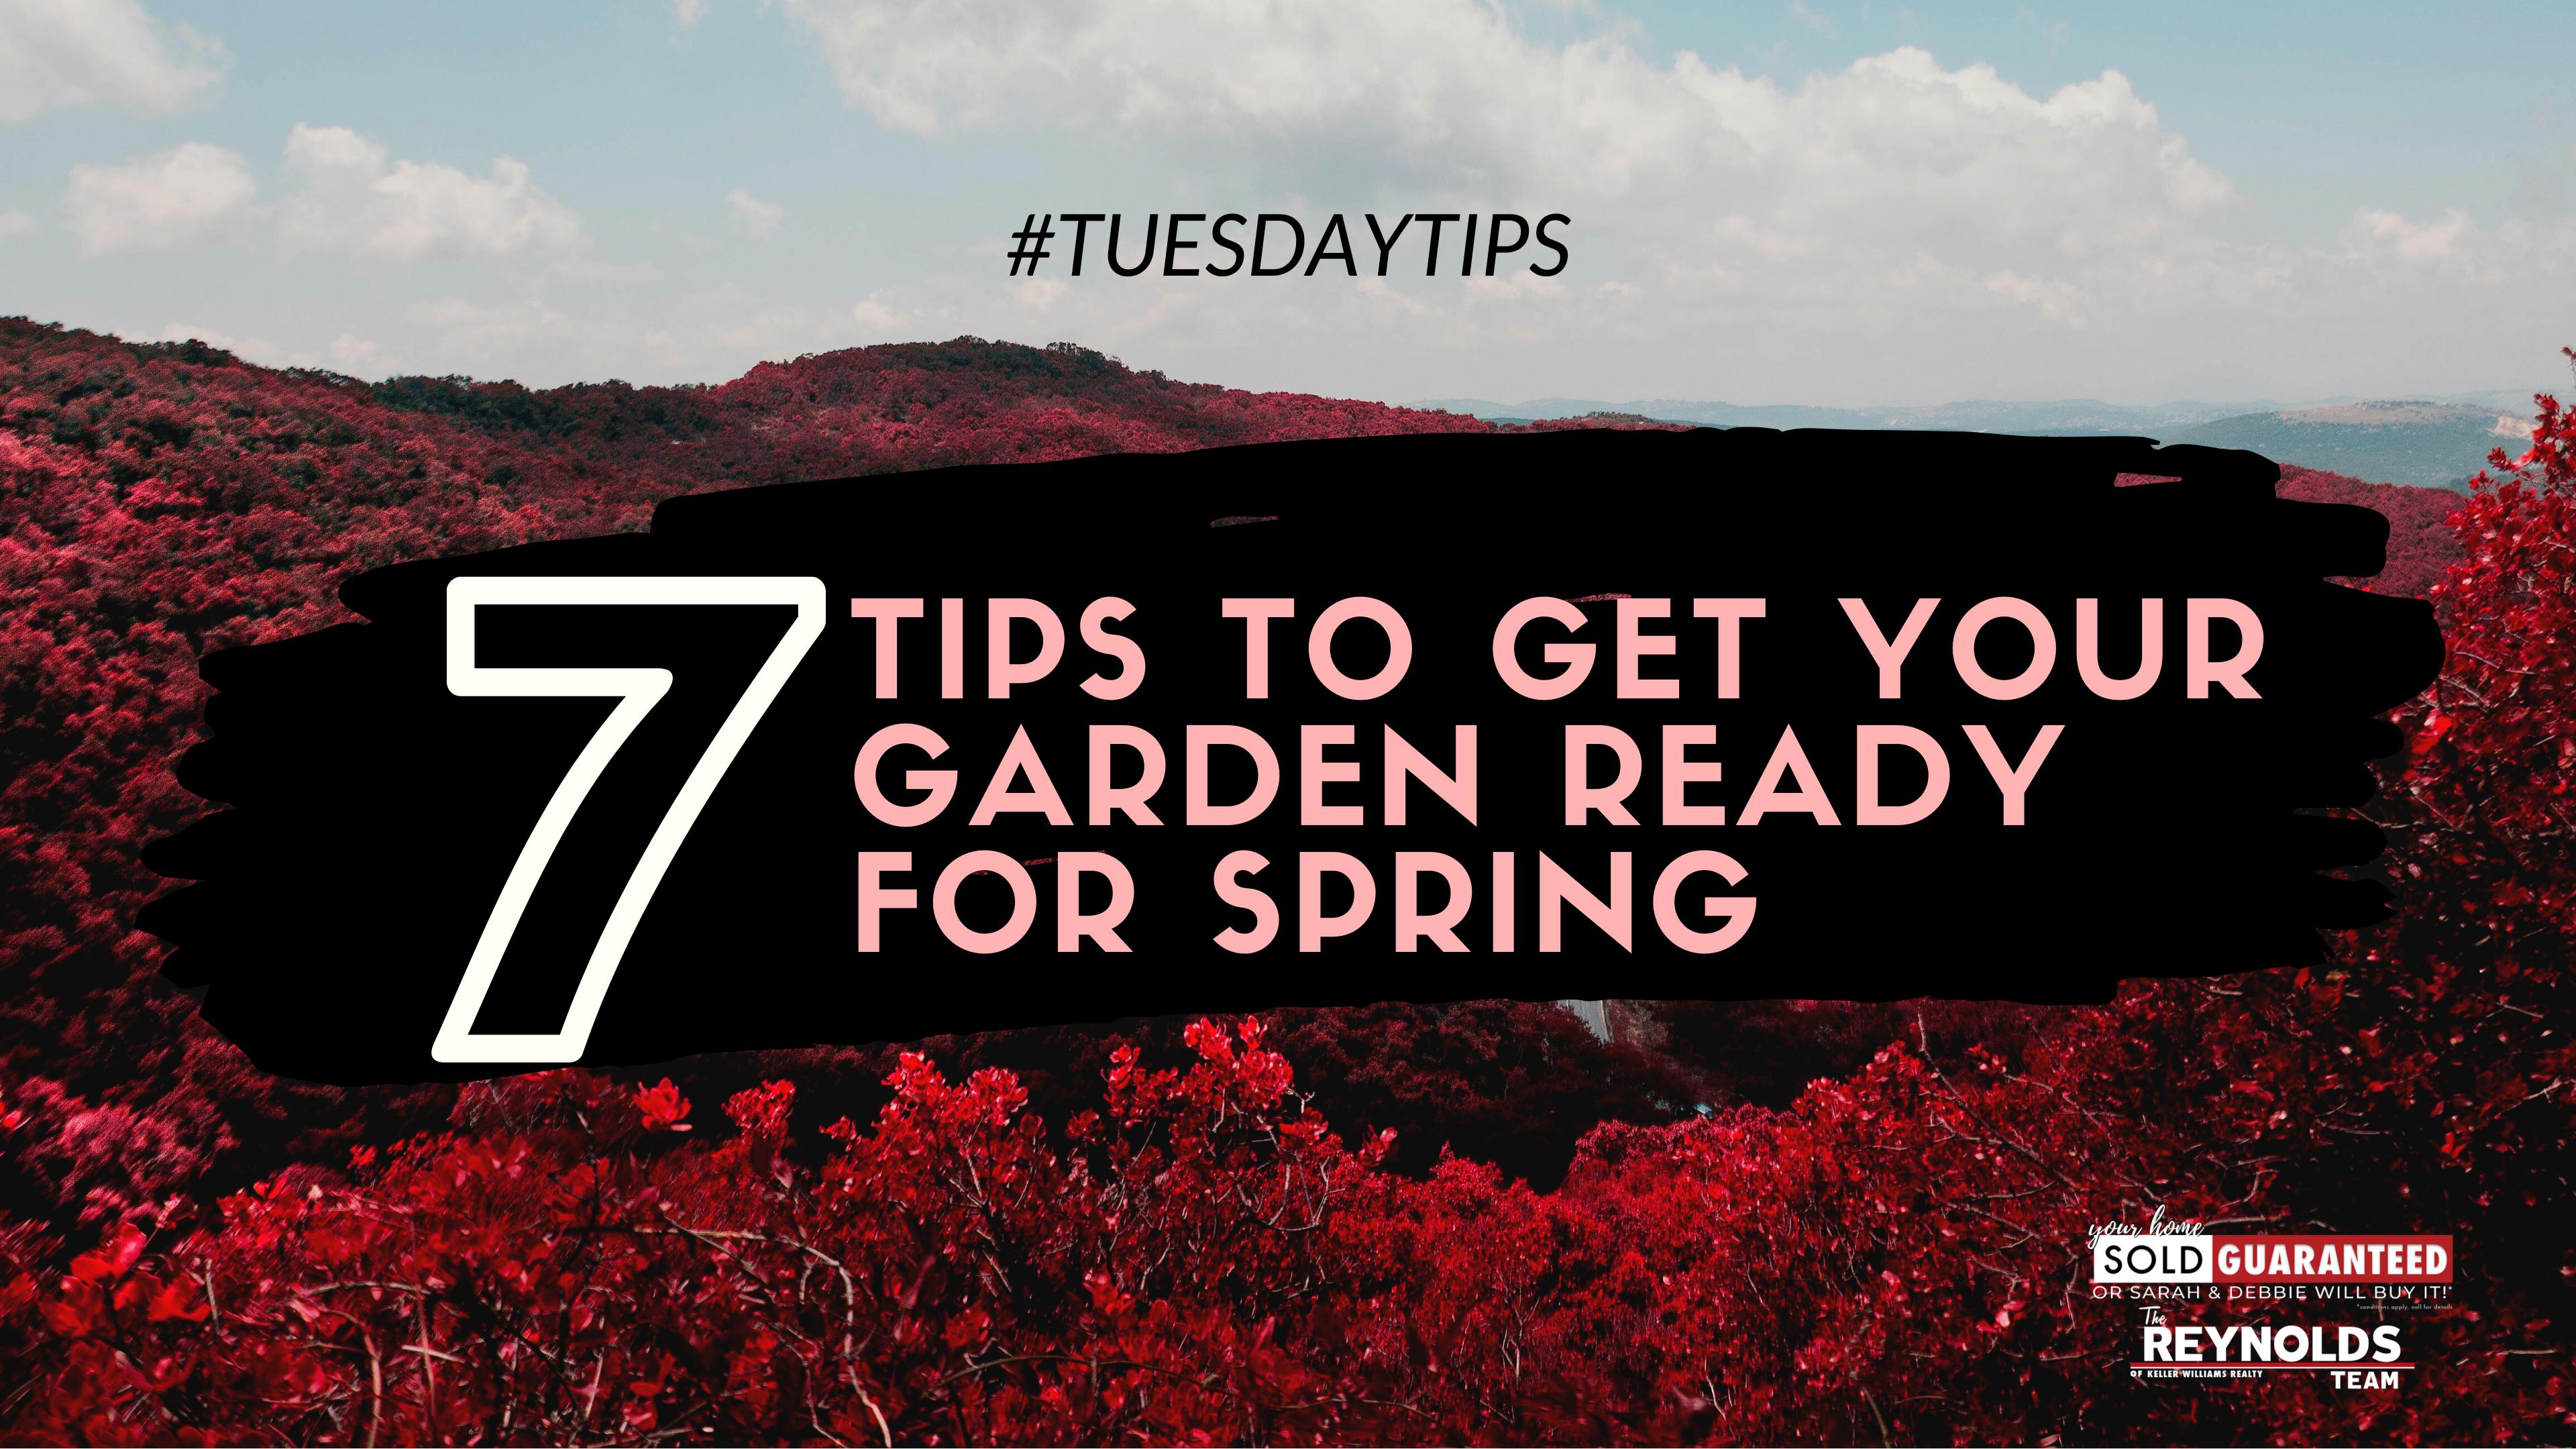 7 Tips to Get Your Garden Ready for Spring